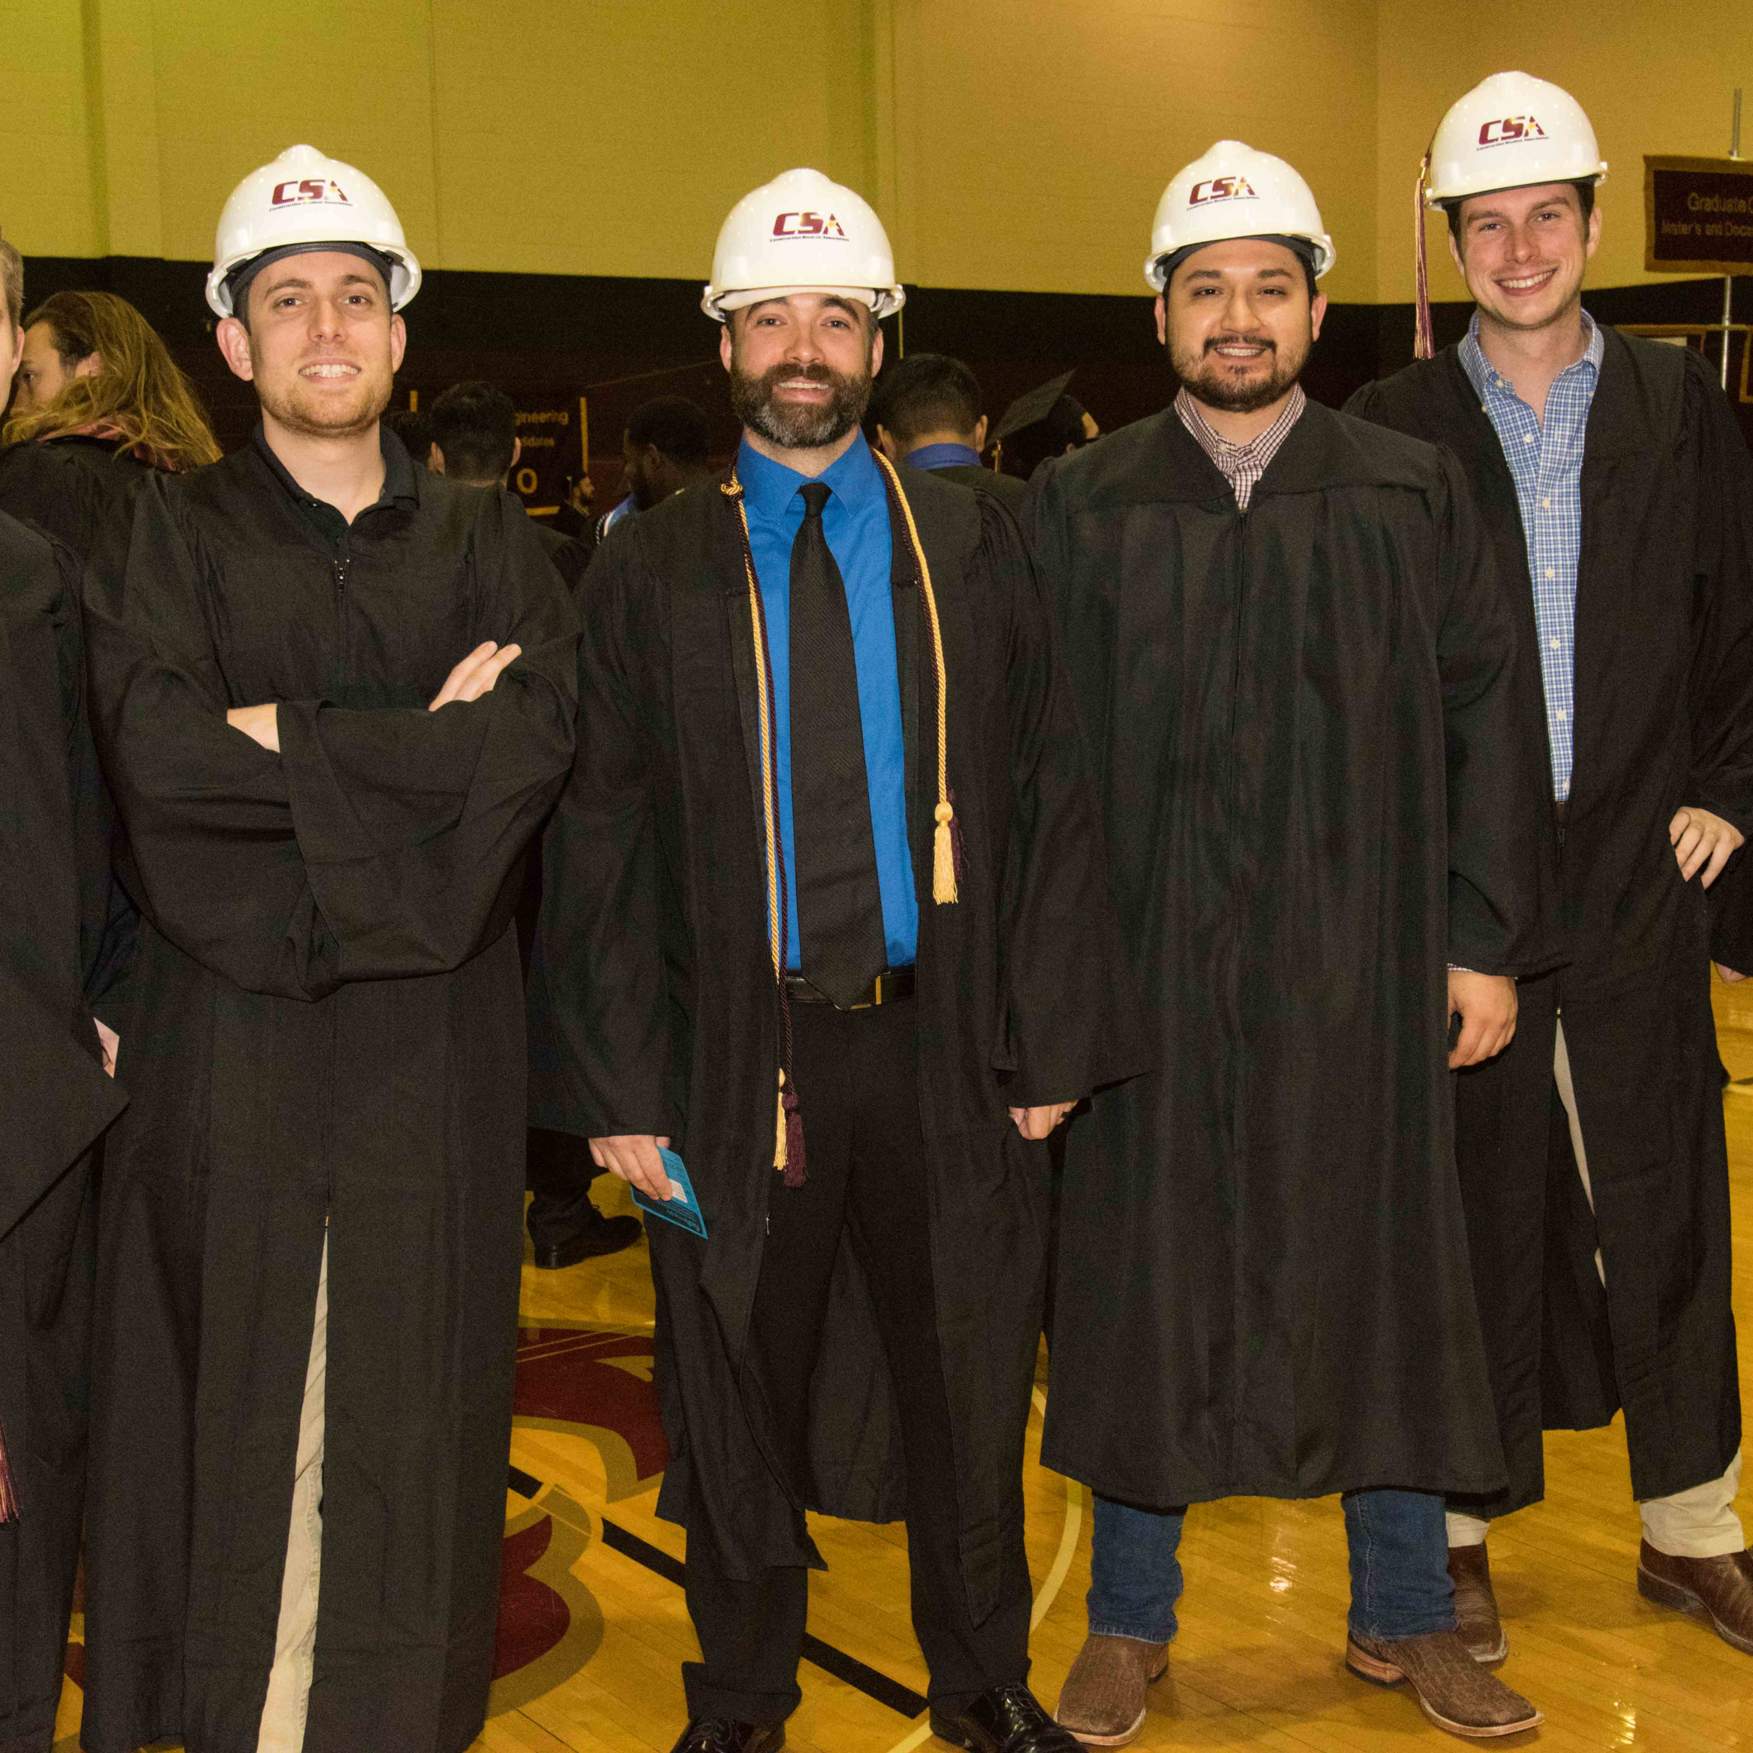 Graduates wearing hard hats during the College of Science and Engineering ceremony.